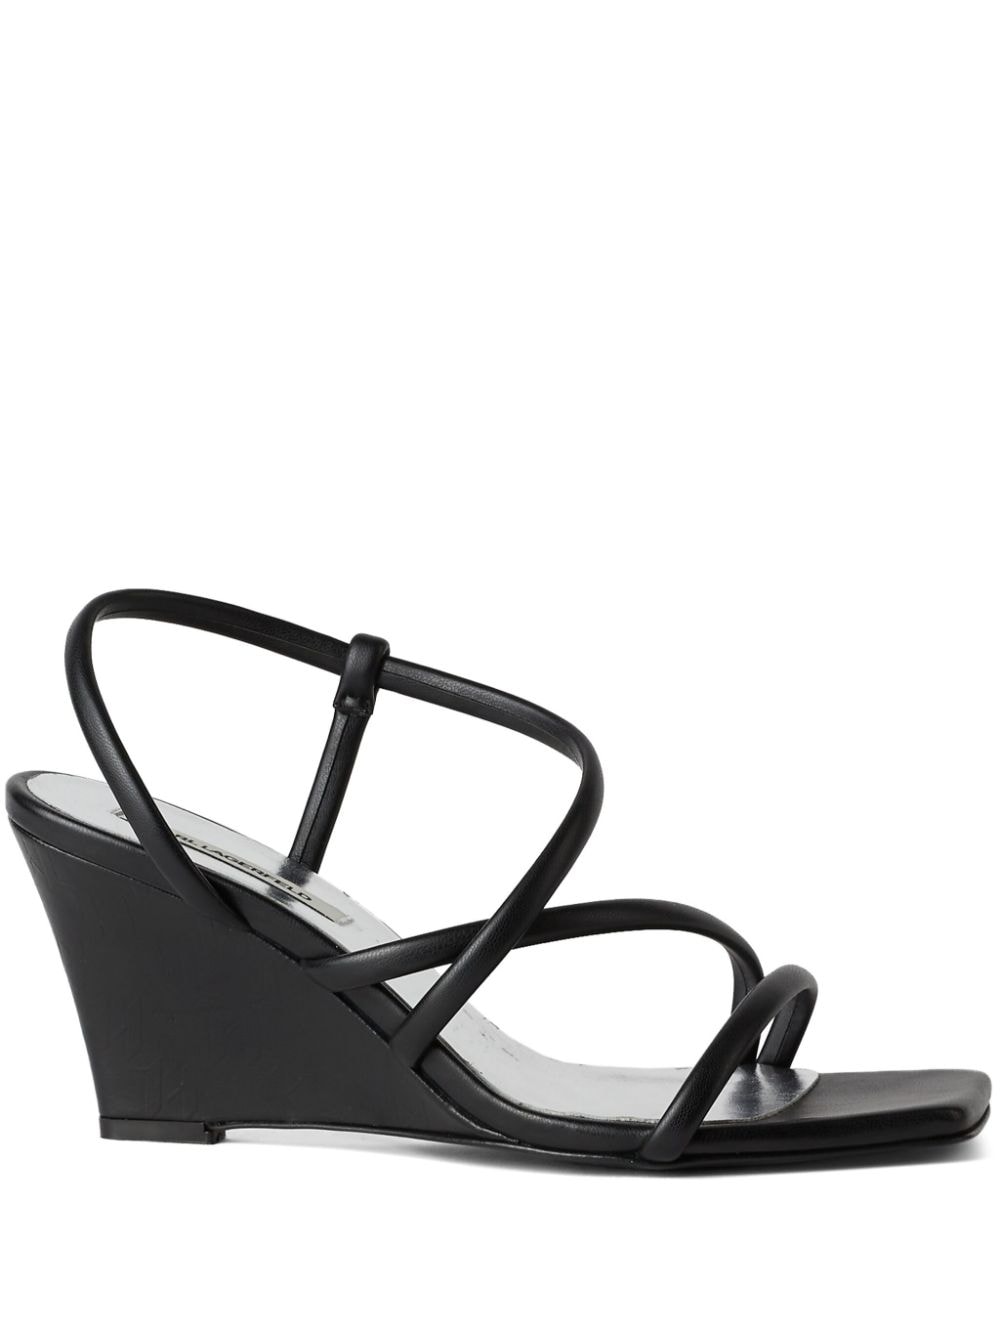 Karl Lagerfeld Rialto 80mm Leather Sandals In Black